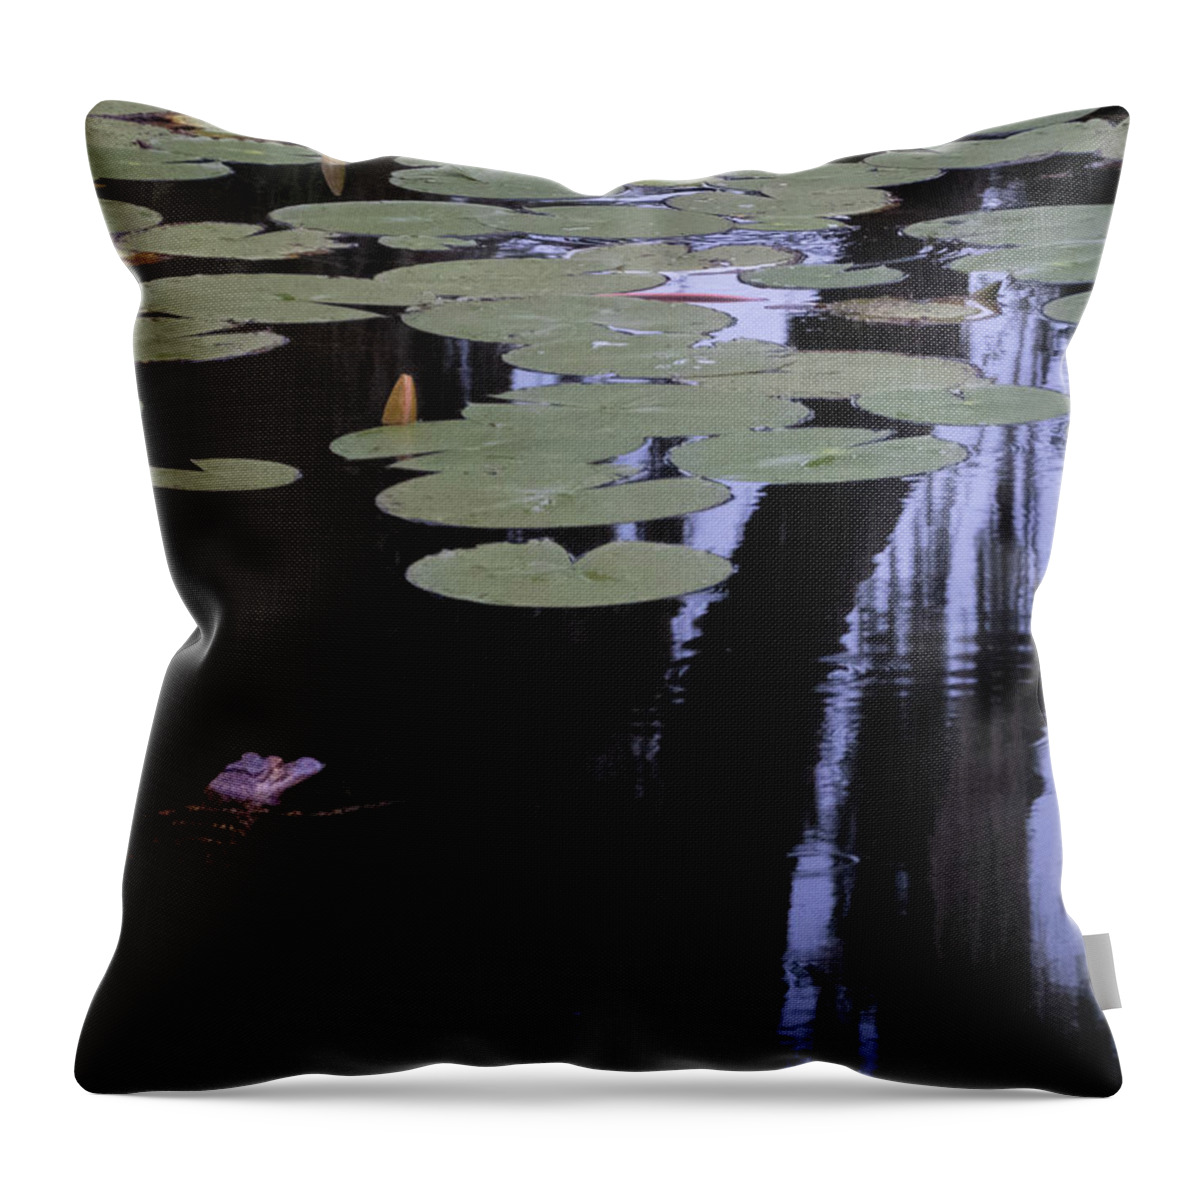 Alligator Throw Pillow featuring the photograph Alligator, Water Lily, And Reflection by Phil And Karen Rispin